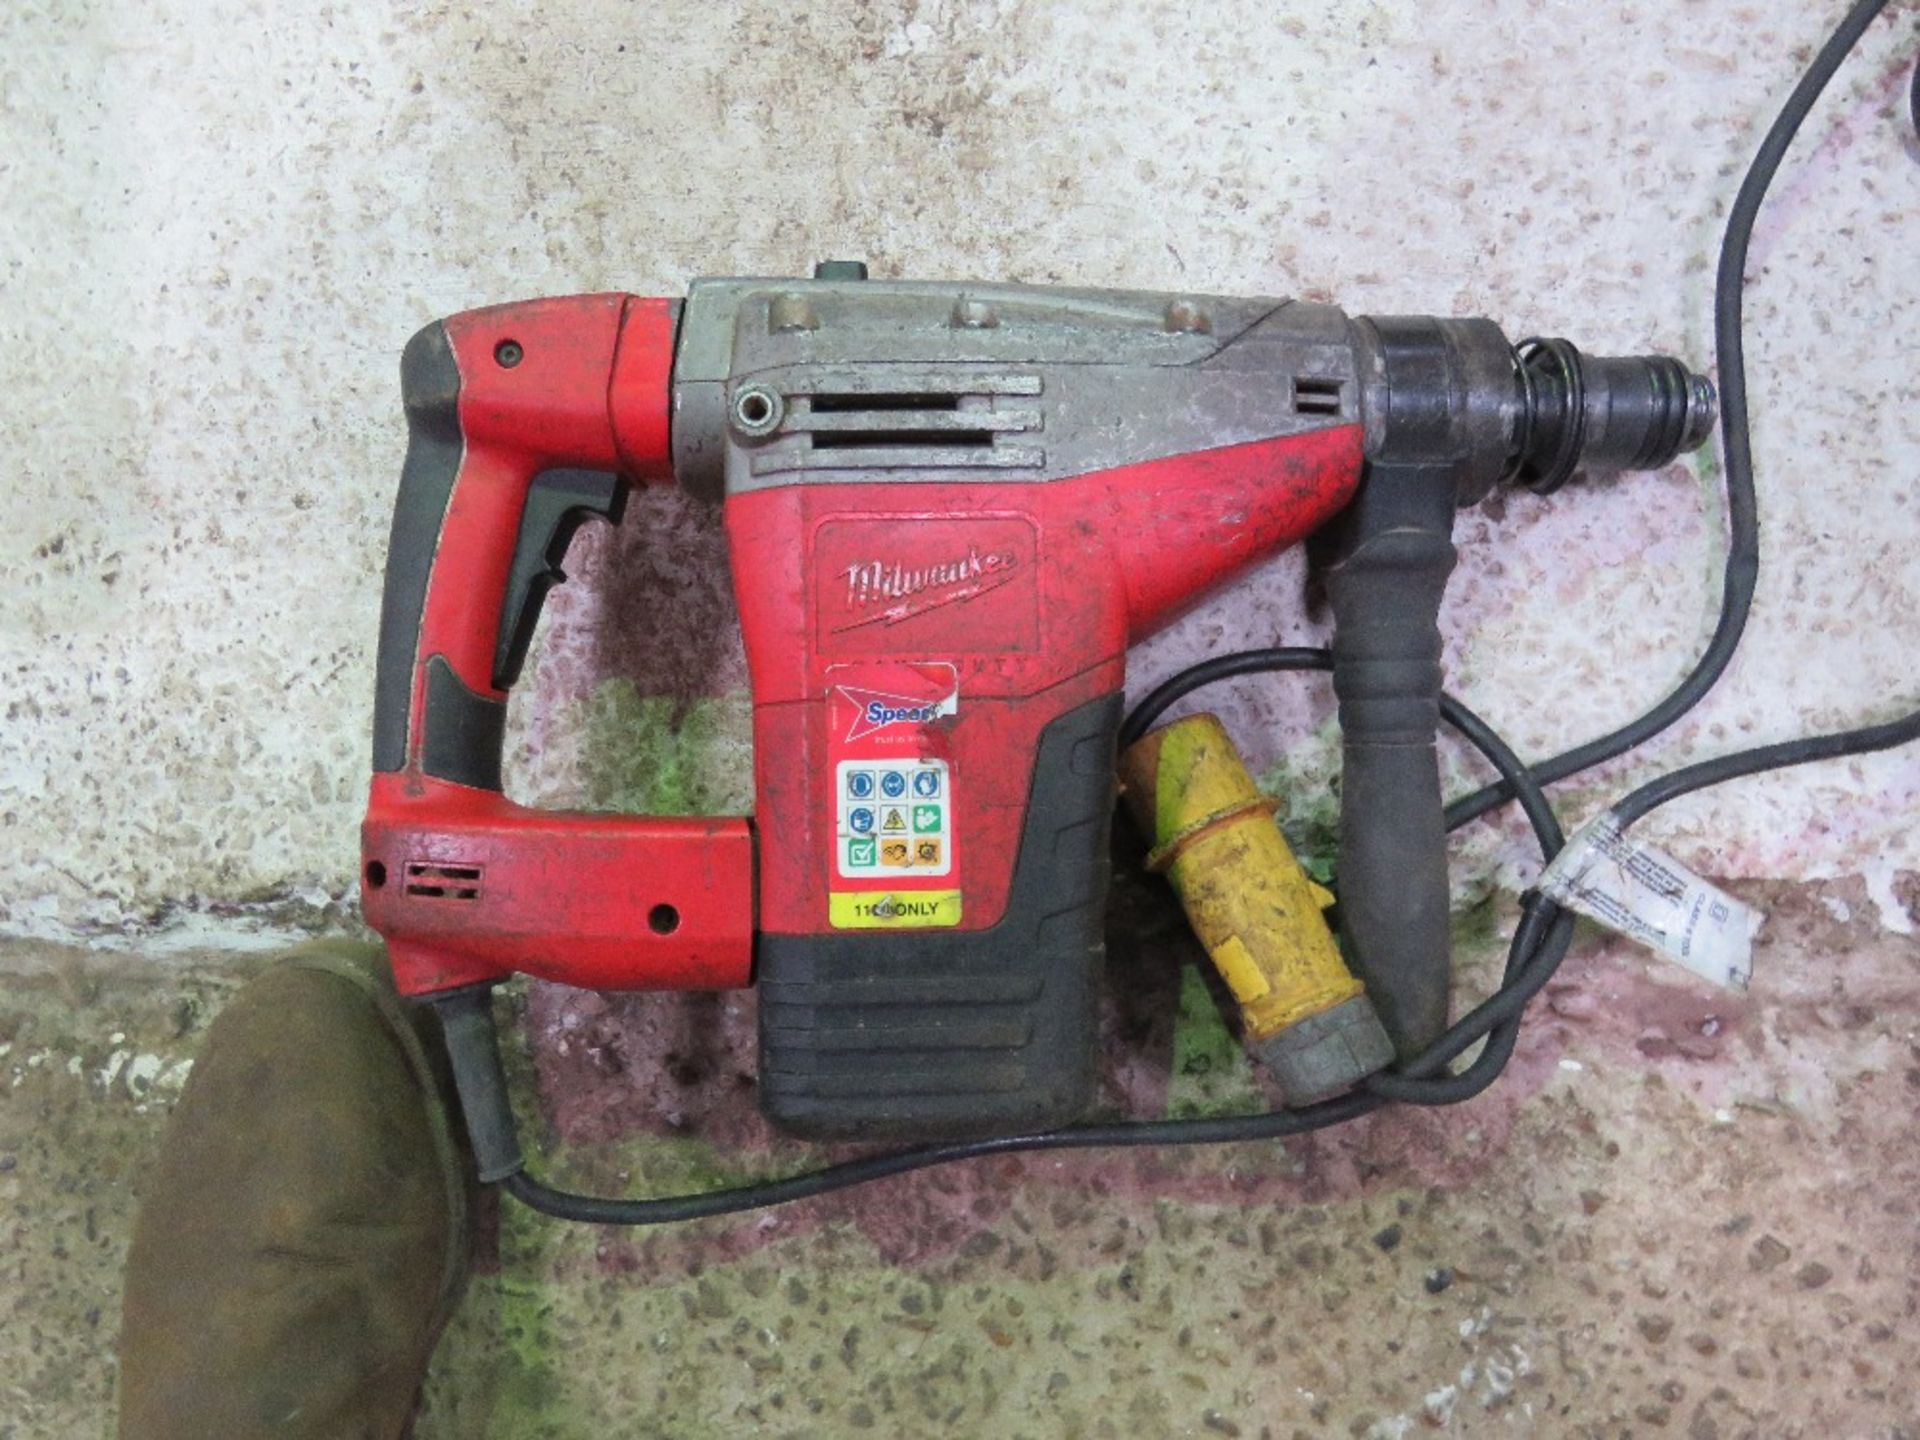 MILWAUKEE 110VOLT BREAKER DRILL, CHUCK REQUIRES ATTENTION - Image 2 of 3